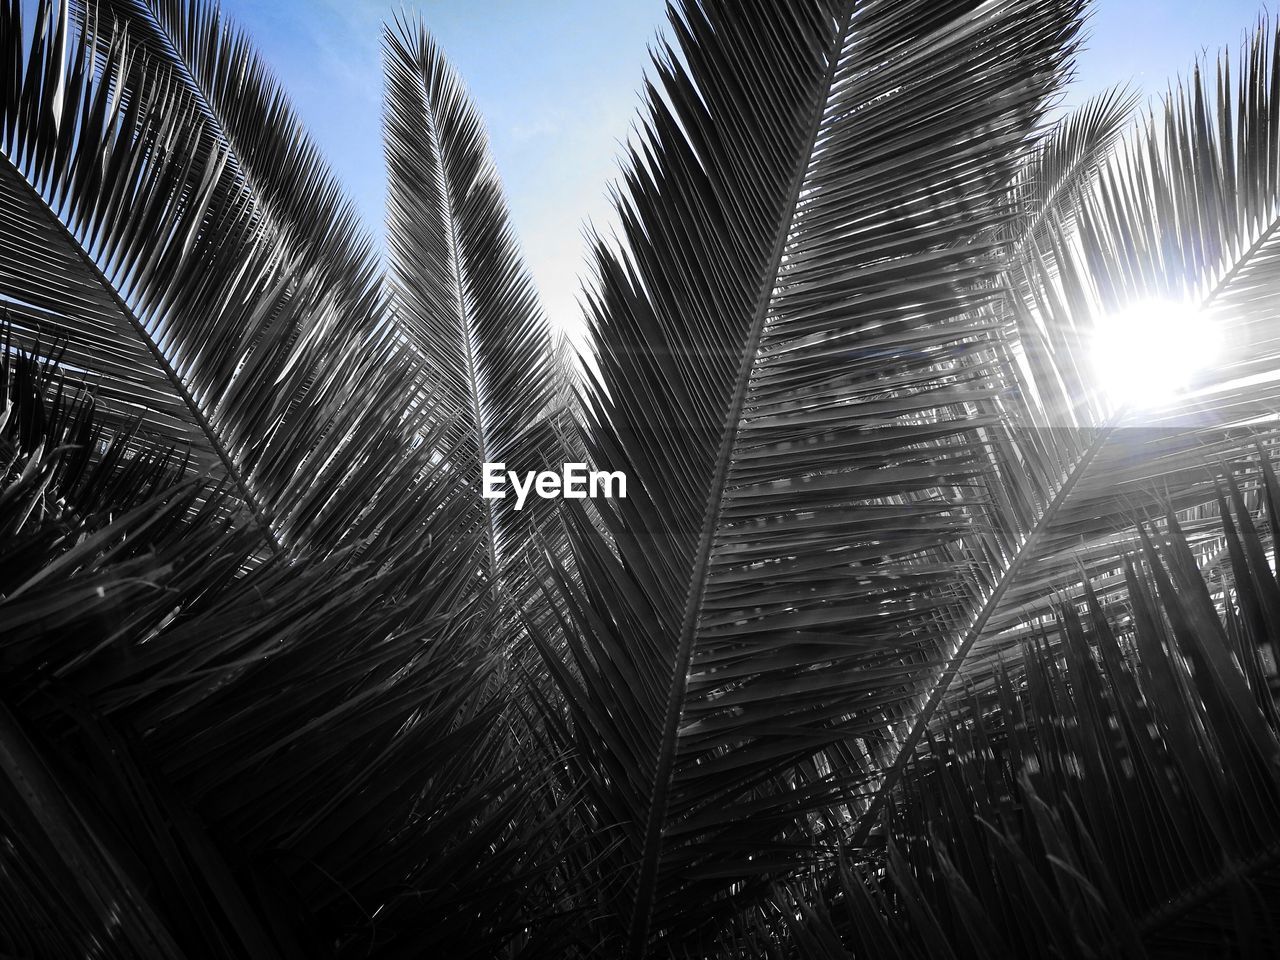 CLOSE-UP OF PALM TREE AGAINST SKY